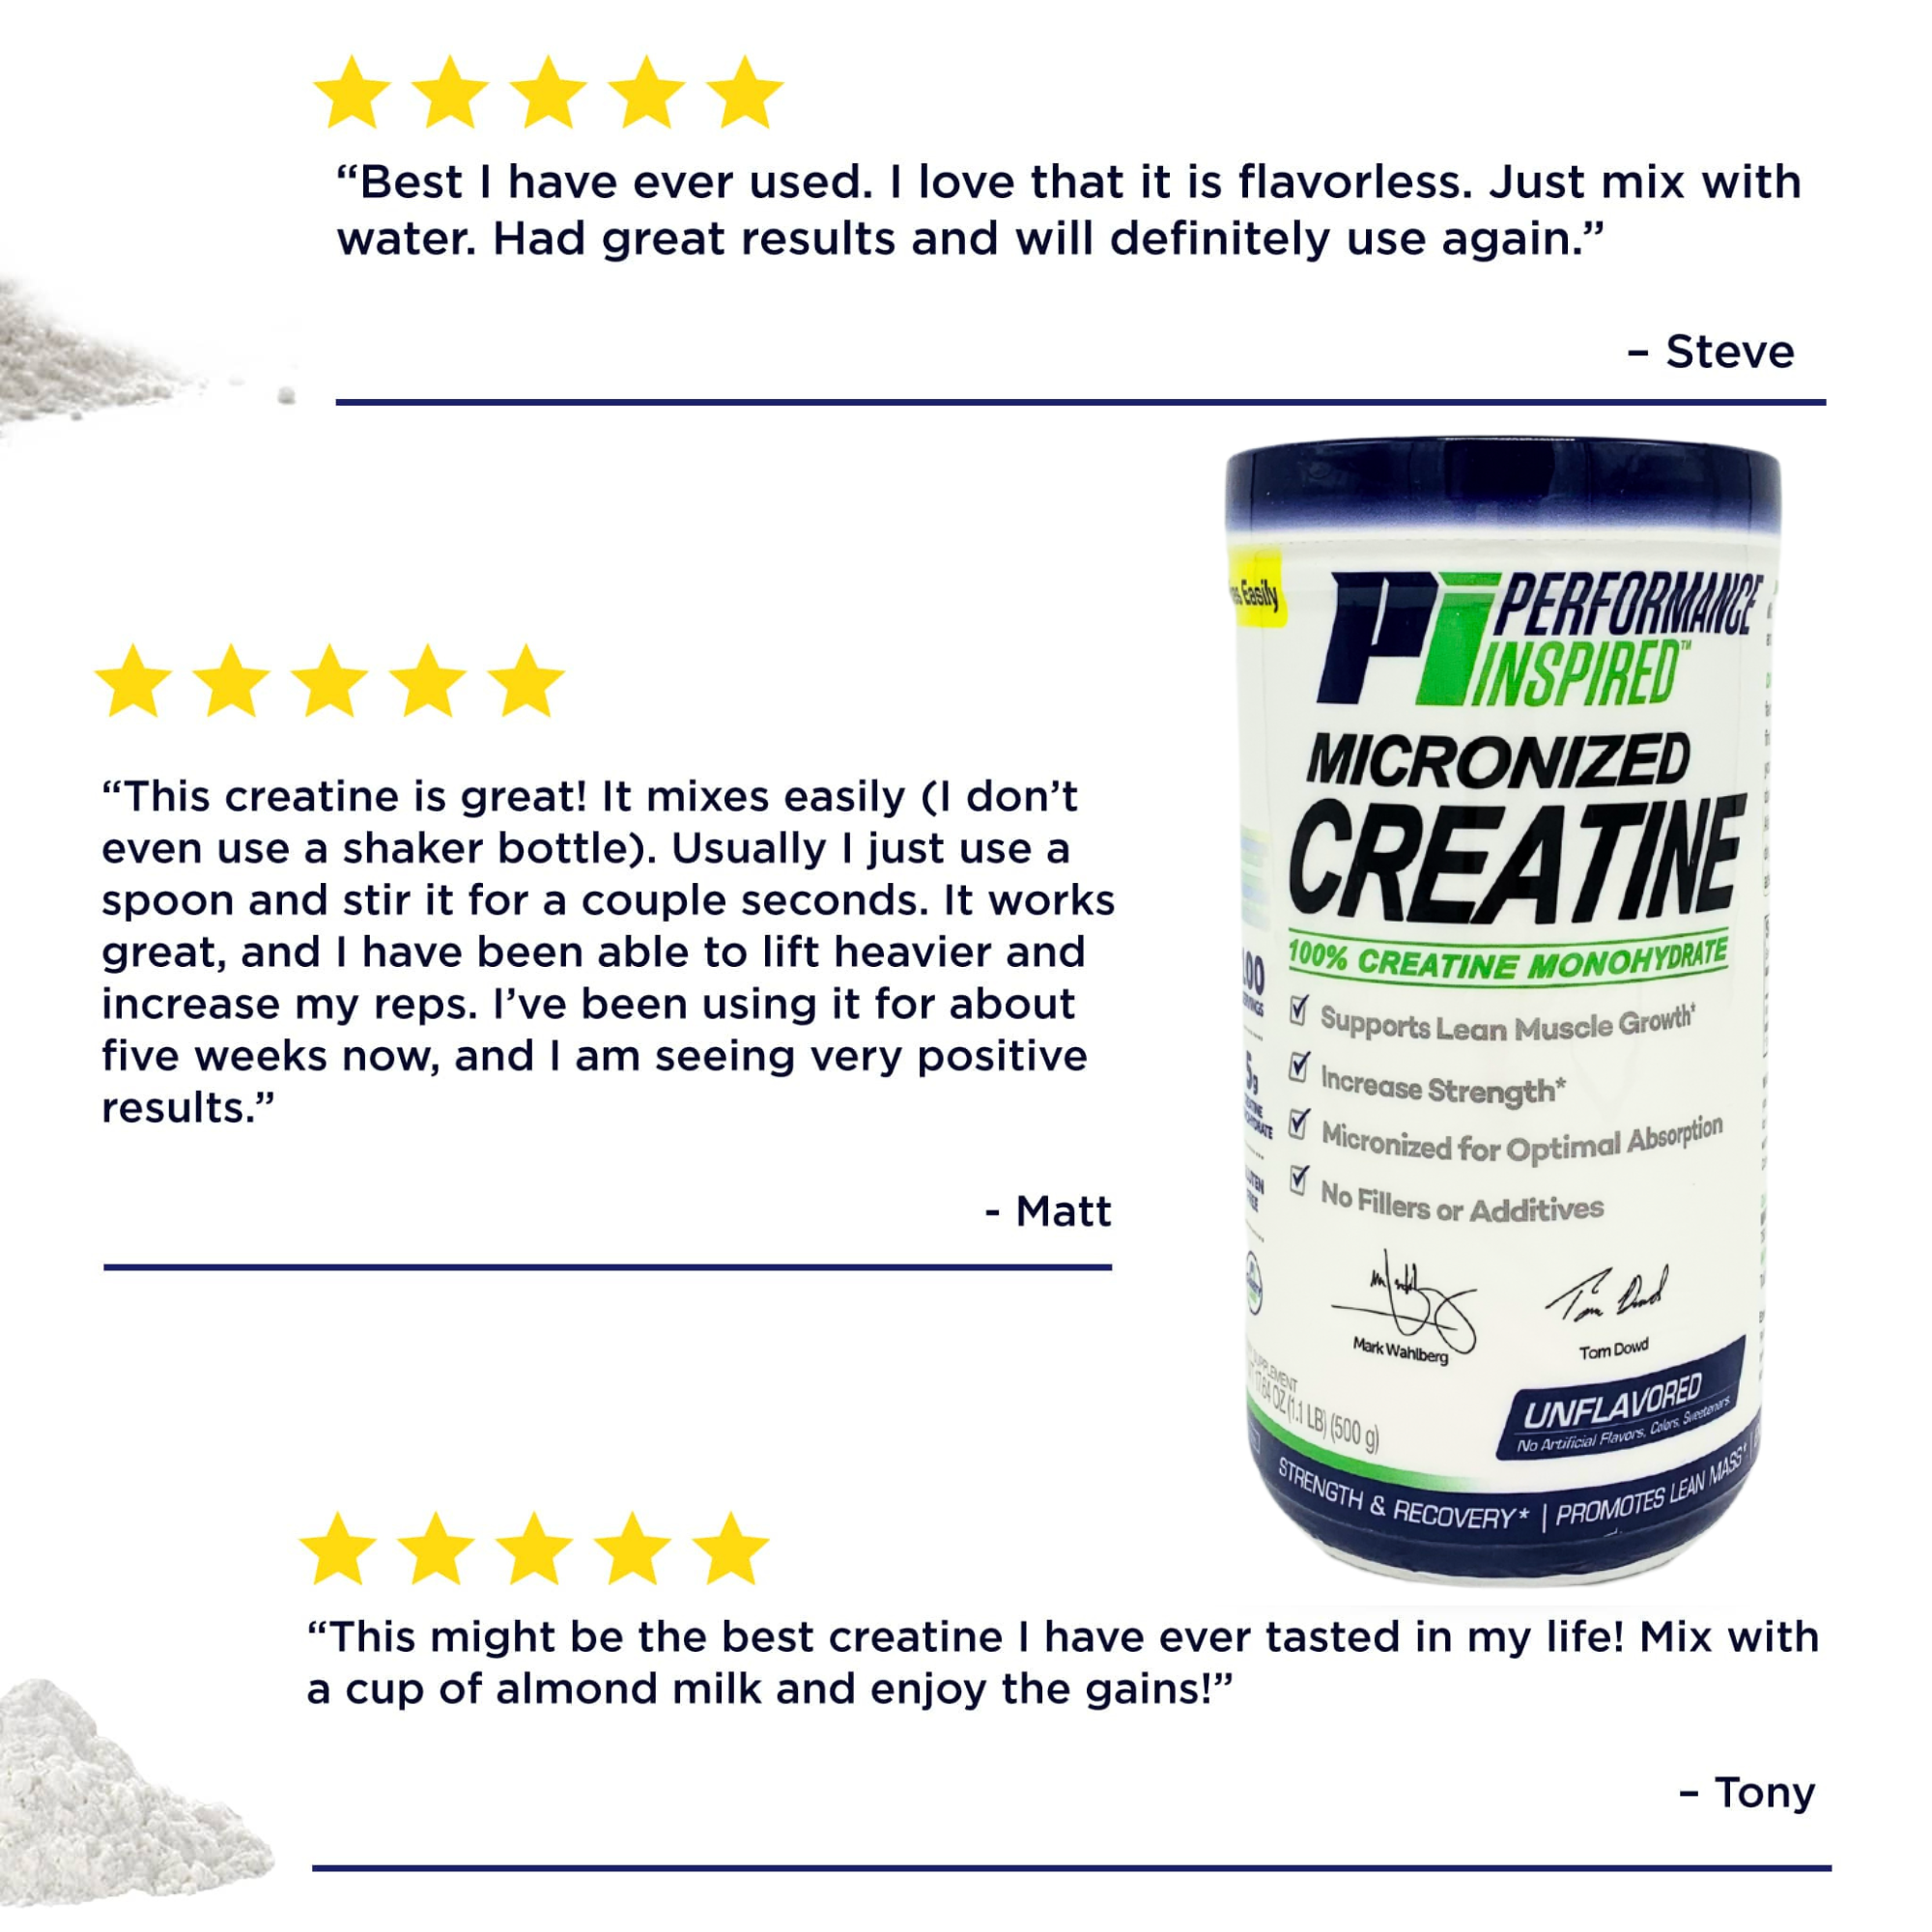 https://pi-nutrition.com/wp-content/uploads/2017/02/creatine-review.png